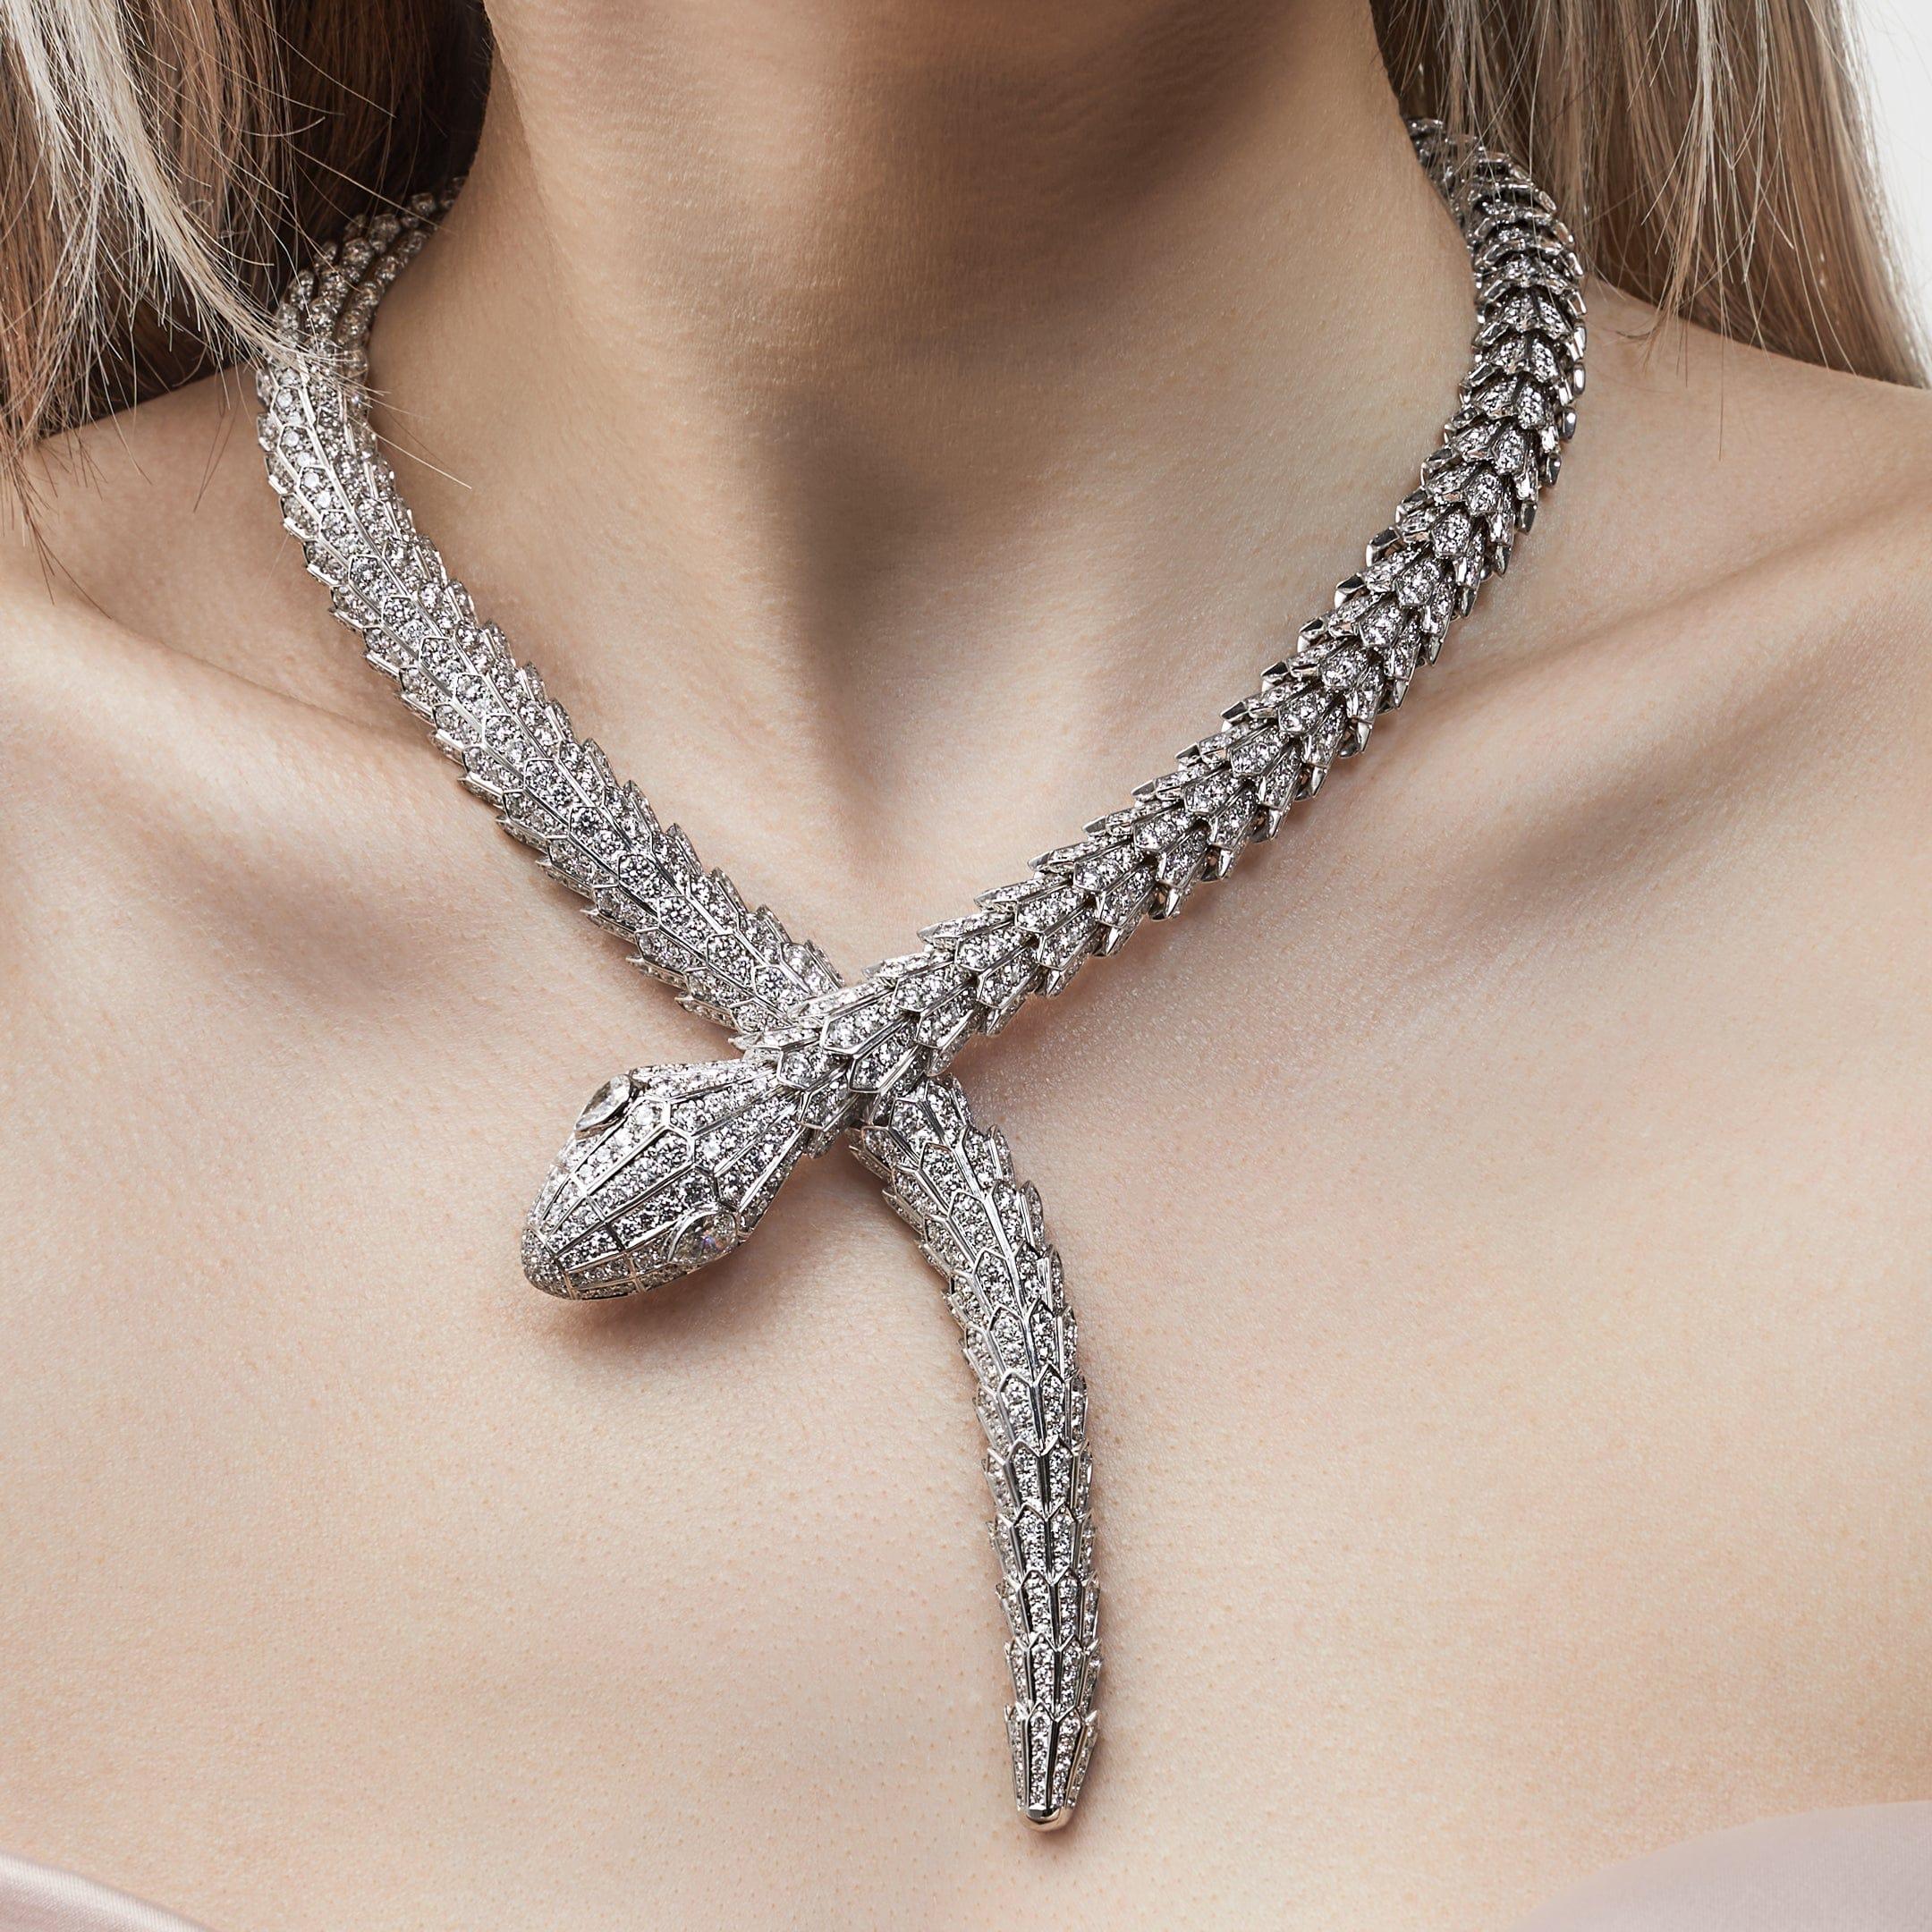 Crafted from 18-karat white gold, this Bvlgari Serpenti necklace is a symbol of Bulgari's artistry and innovation.  Featuring pavé-set diamonds , the head and tail of the serpent mimic the snake's scales and add elegant brilliance to the piece. 

A